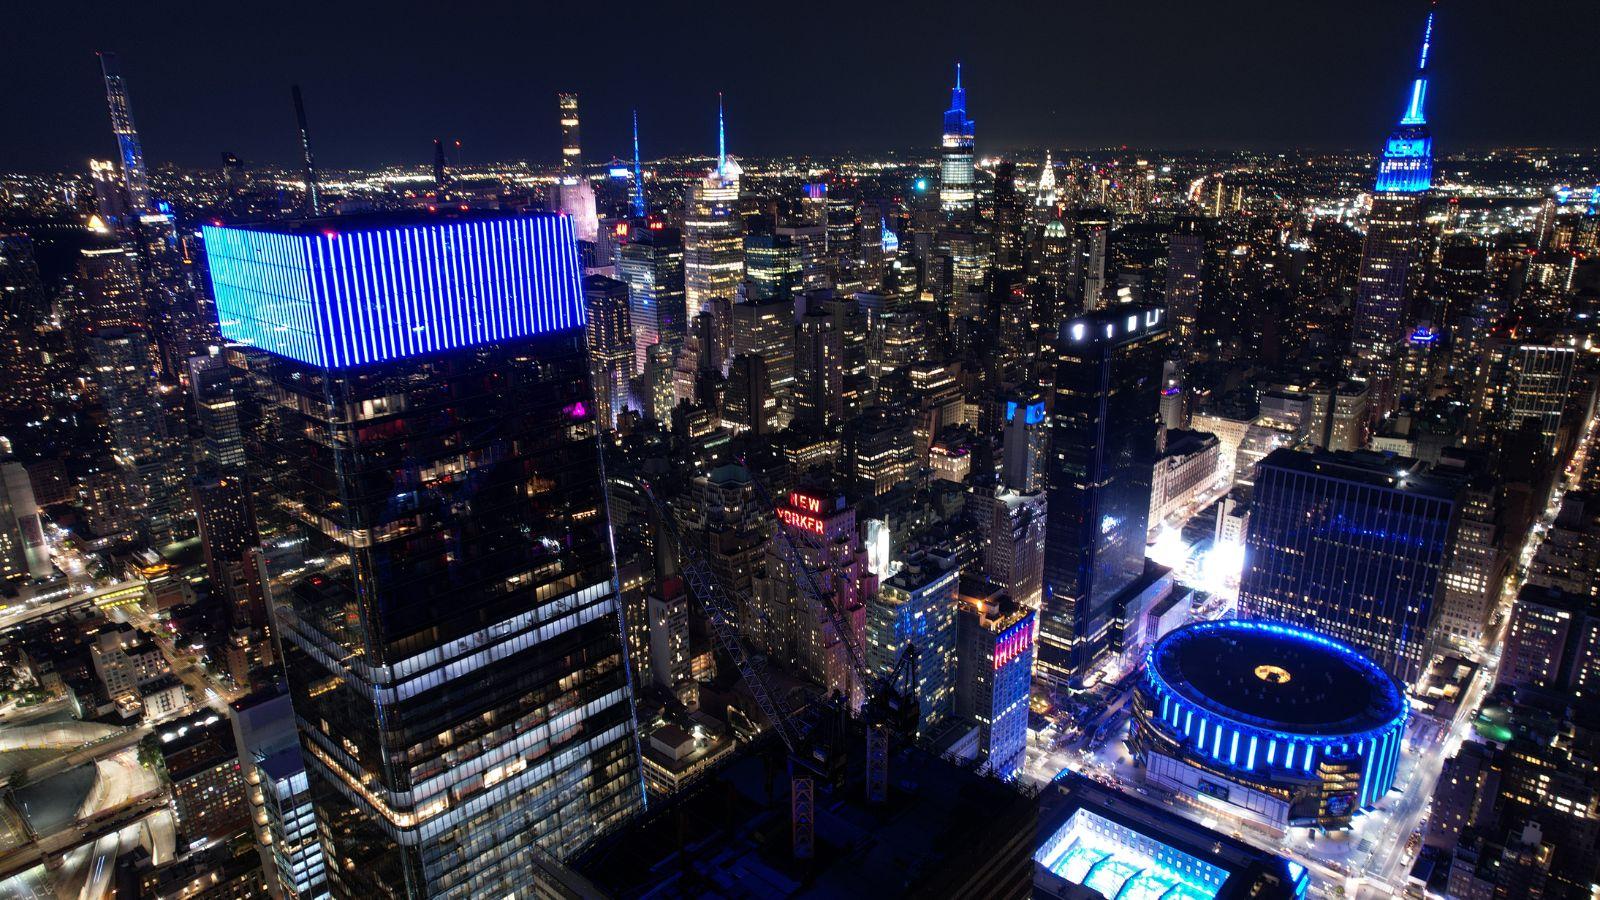 Skyline of Manhattan with buildings illuminated in blue